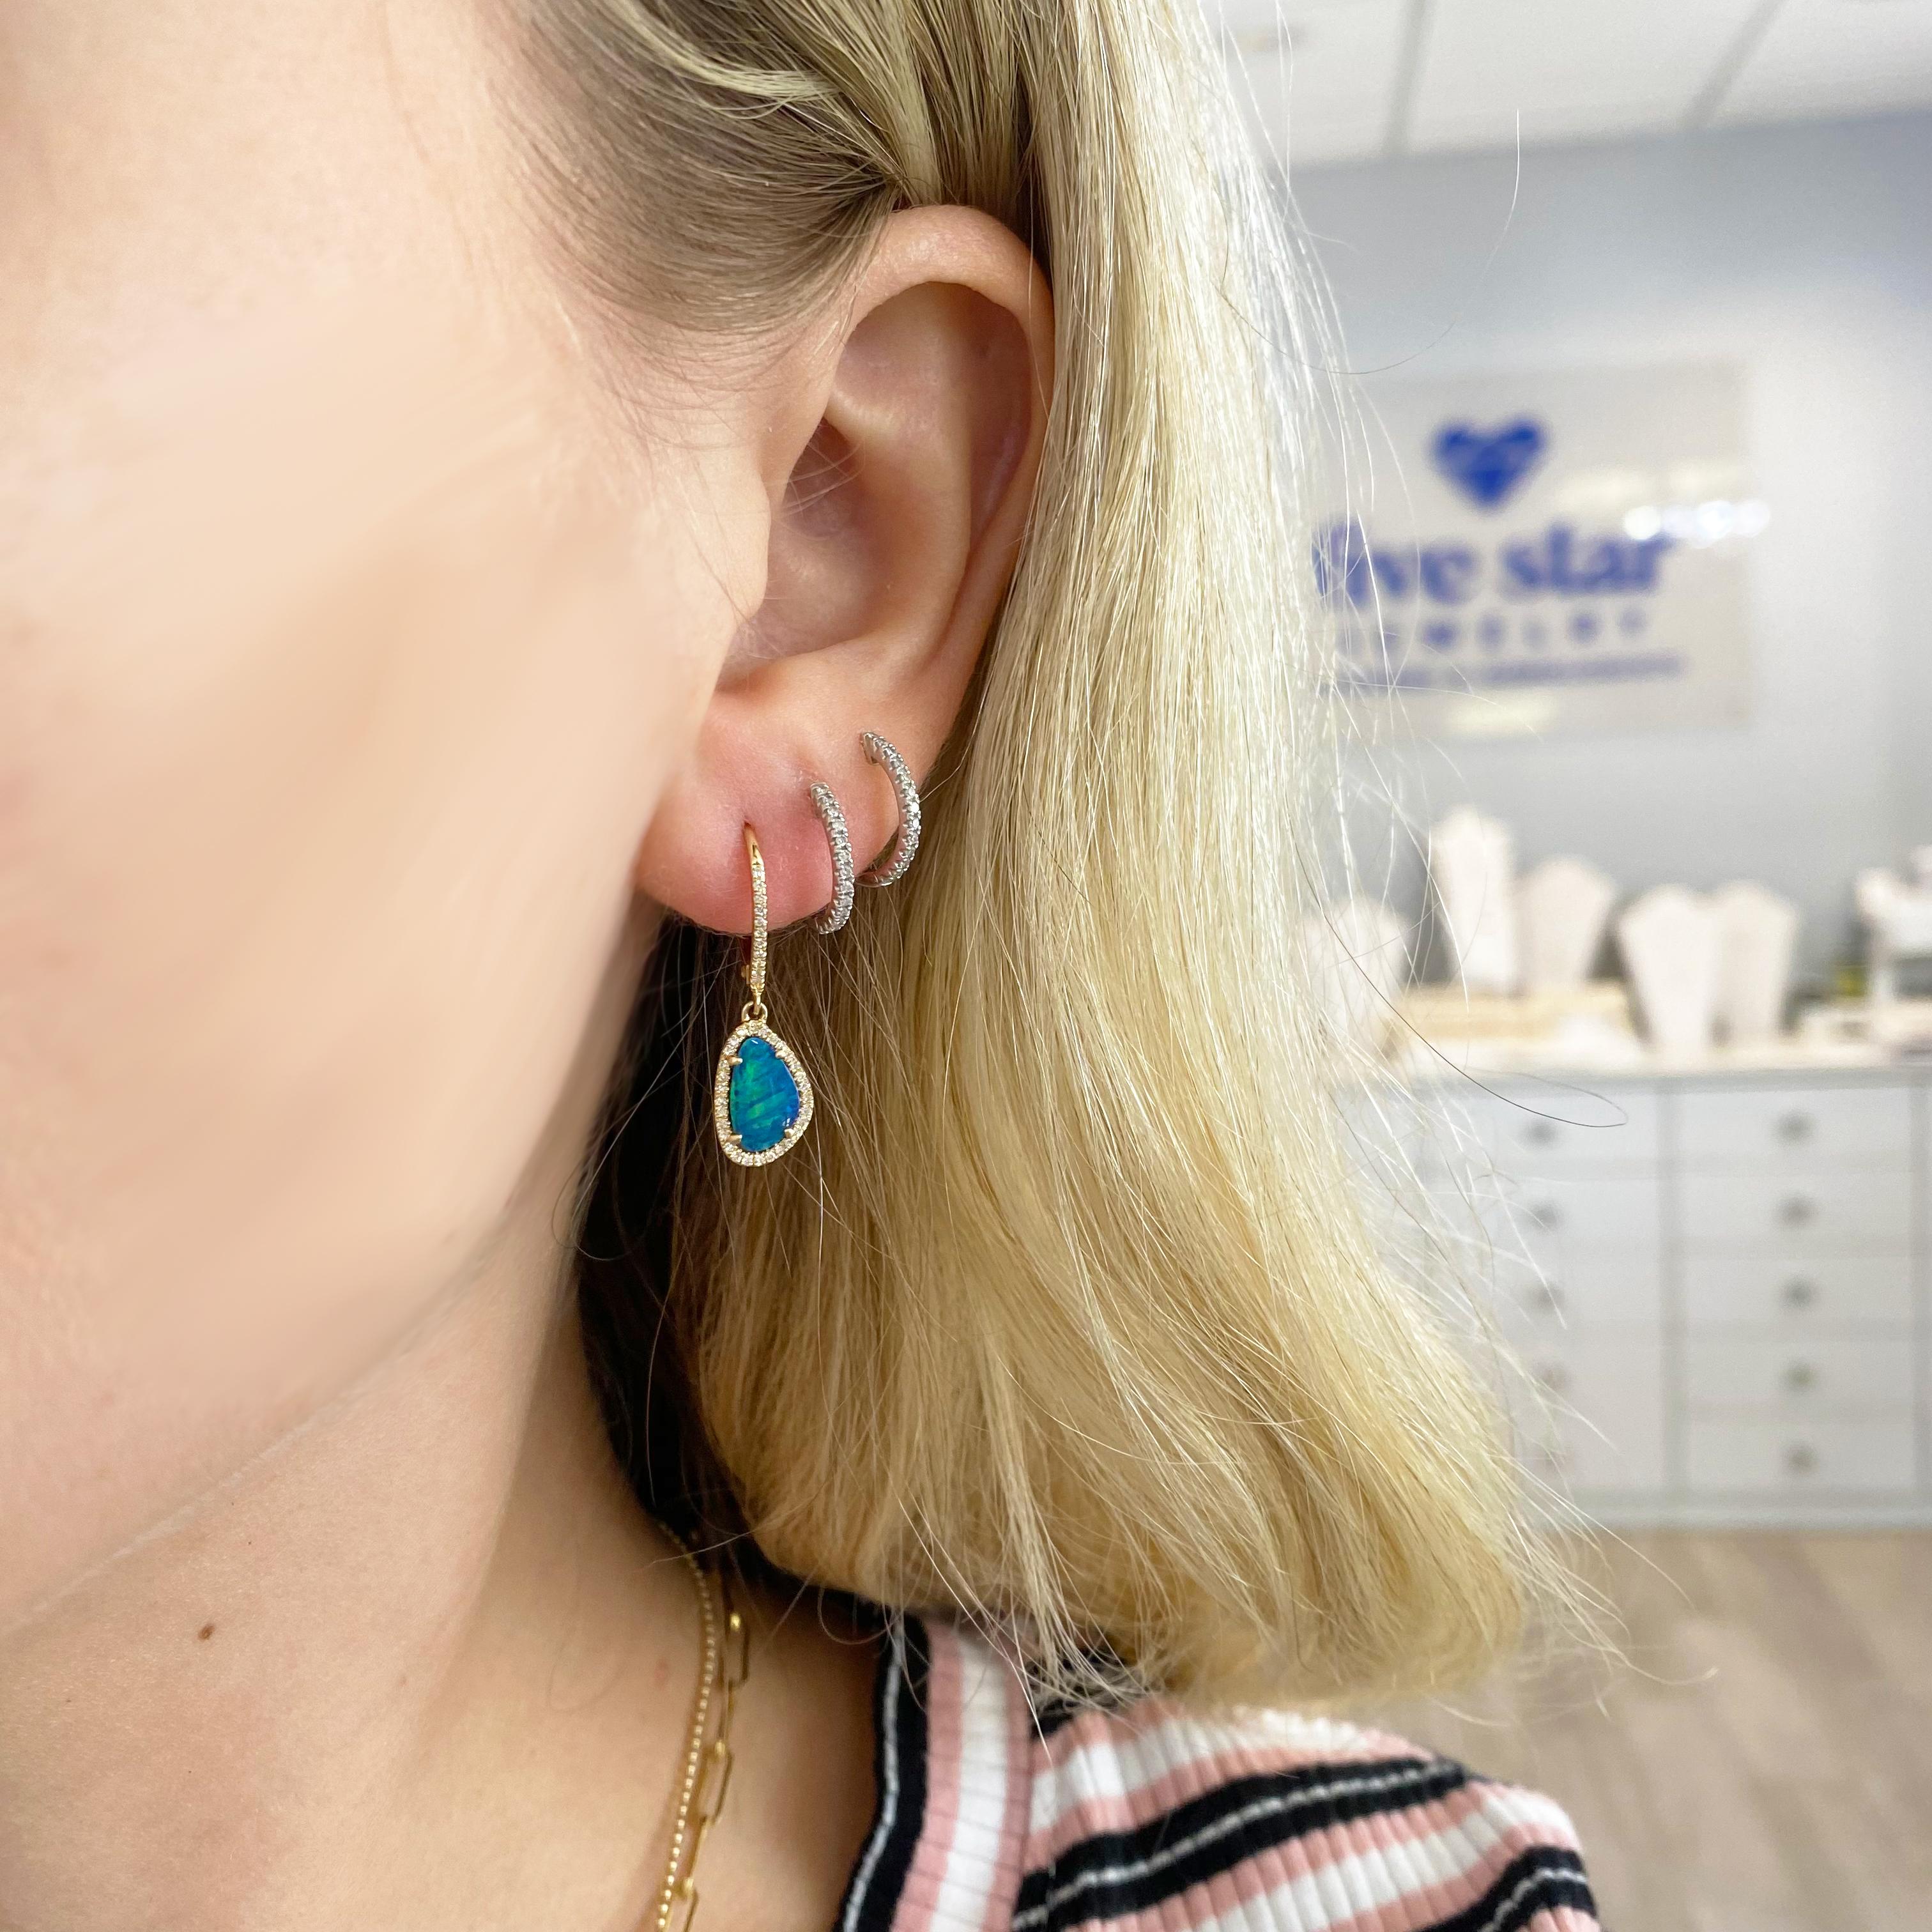 Blue, blue opals look like the ocean with hint of green! These earrings are going to POP when you wear them. Bright blue opals will shine bright with long or short hair! These opal favorites have diamonds surrounding the organic shape and diamonds